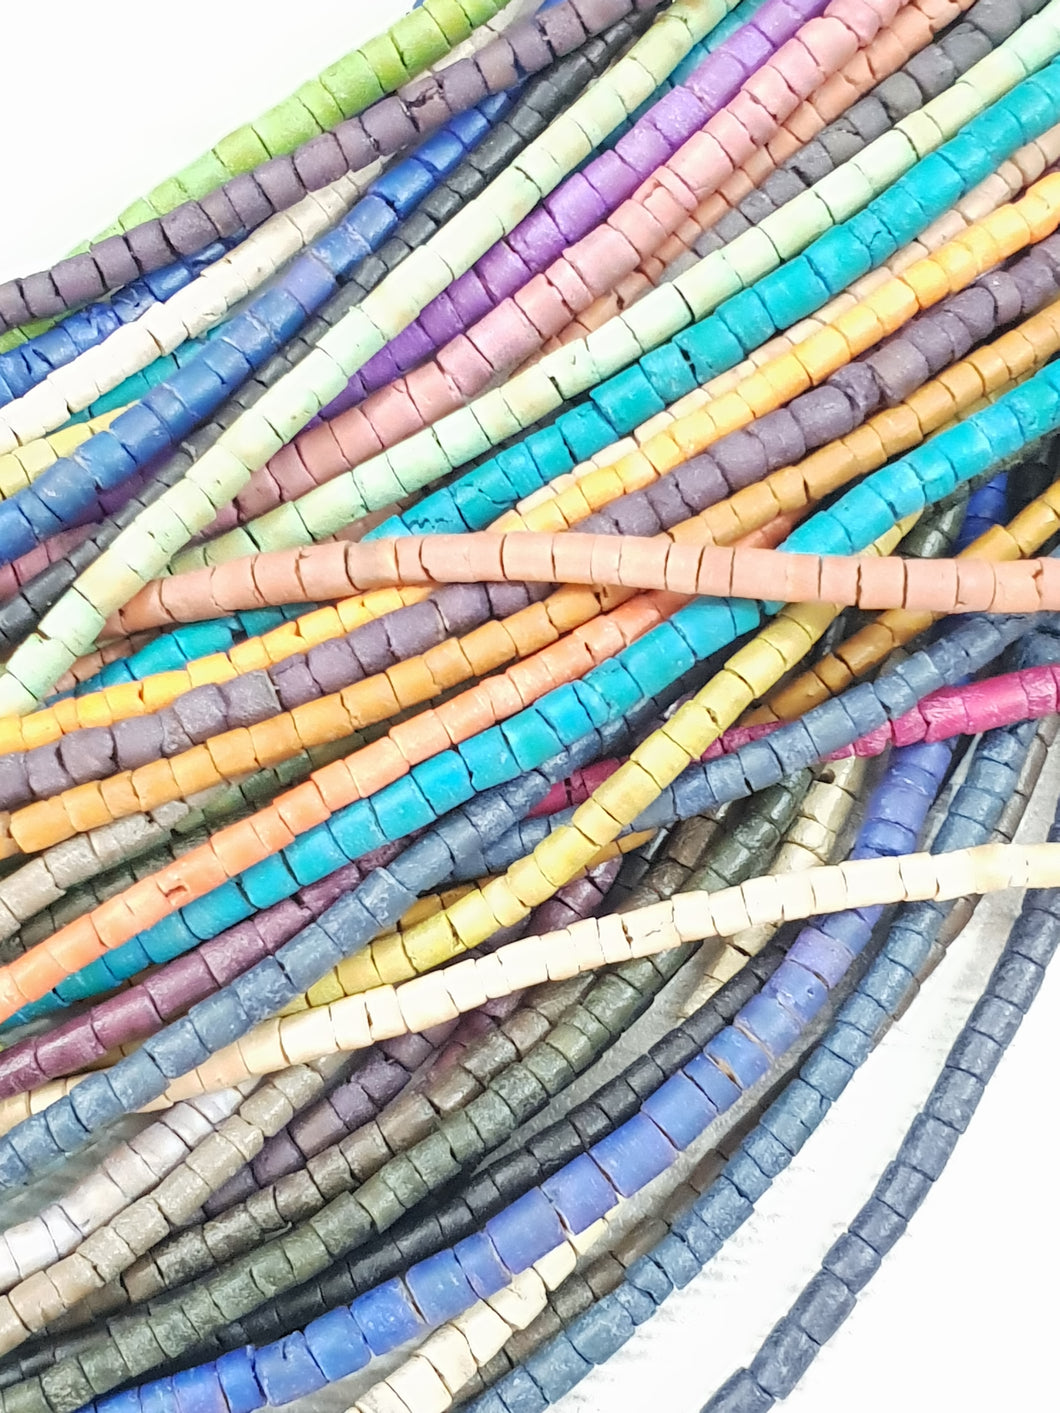 12 Mask Necklaces  60cm assorted colors 2-3mm / made from Natural Materials / 4002.1419